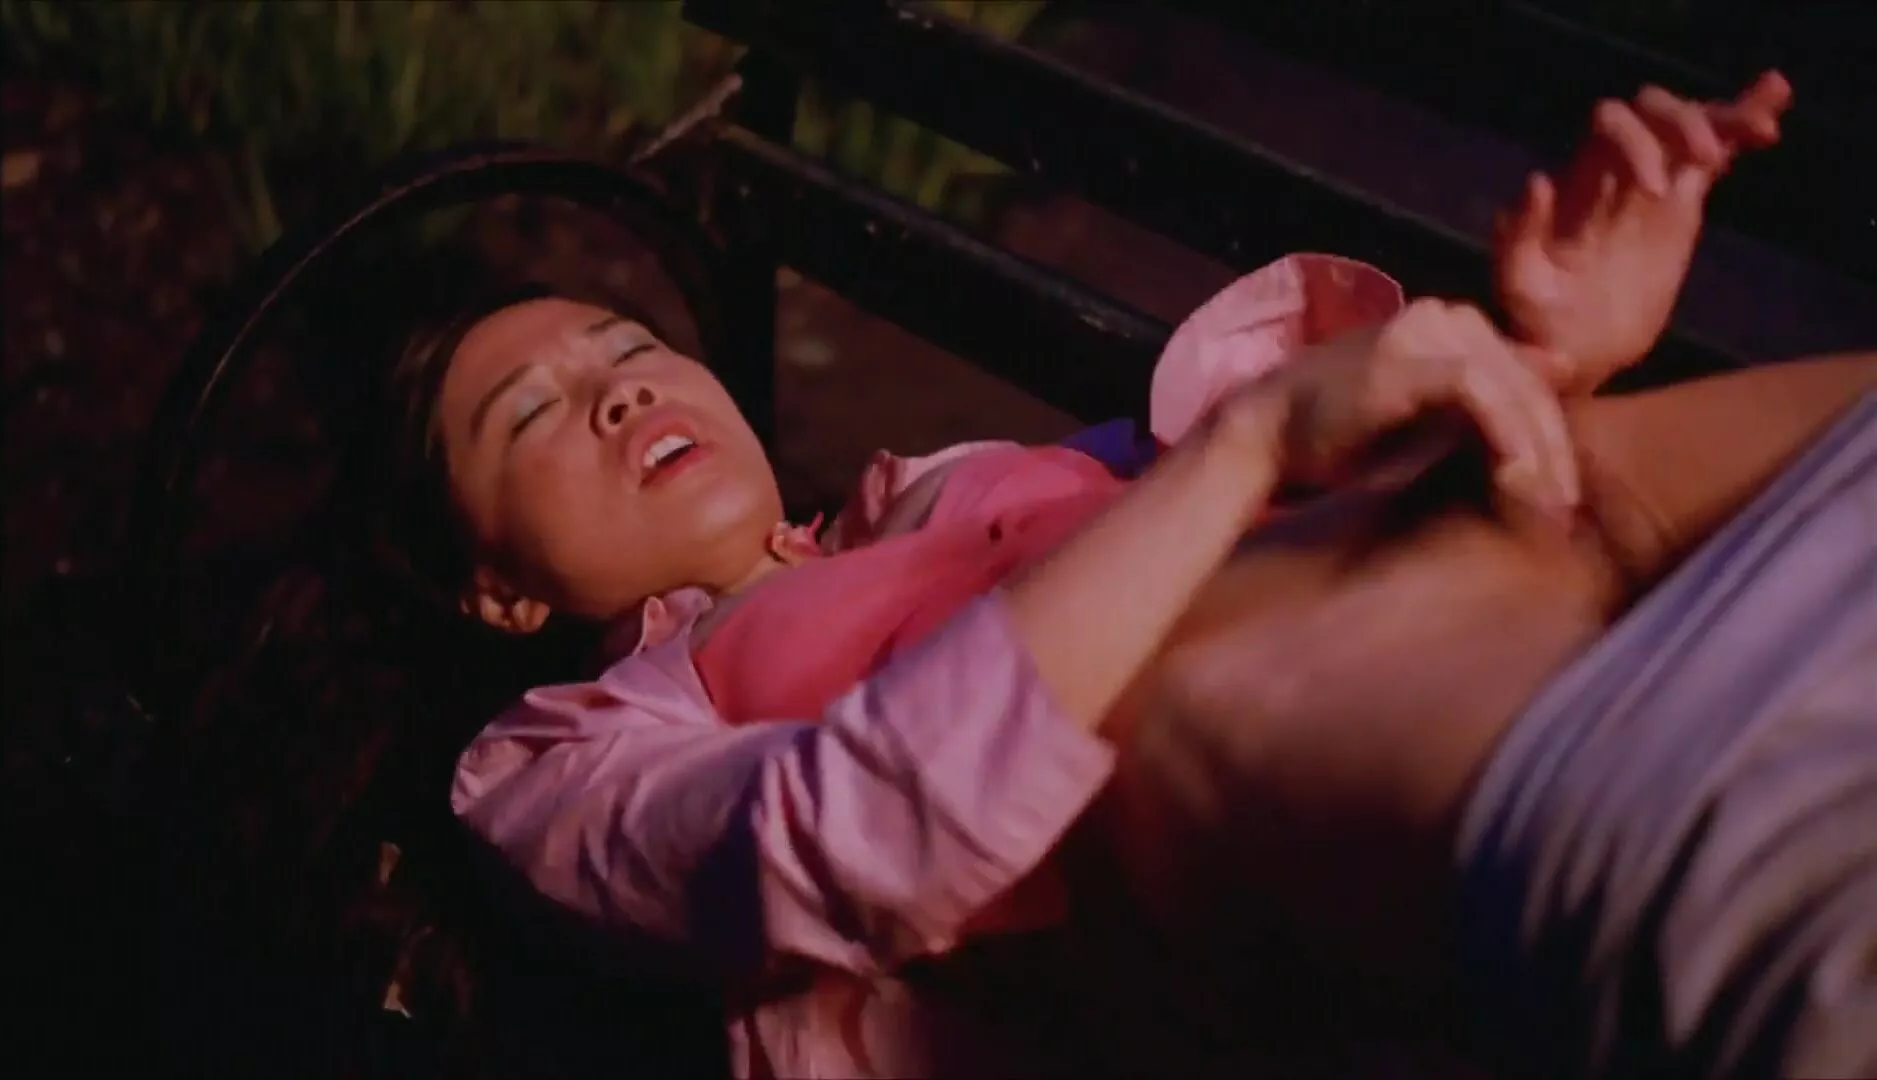 Movie stars going the extra mile on camera: Sook-Yin Lee in Shortbus - Porn  GIF Video | neryda.com